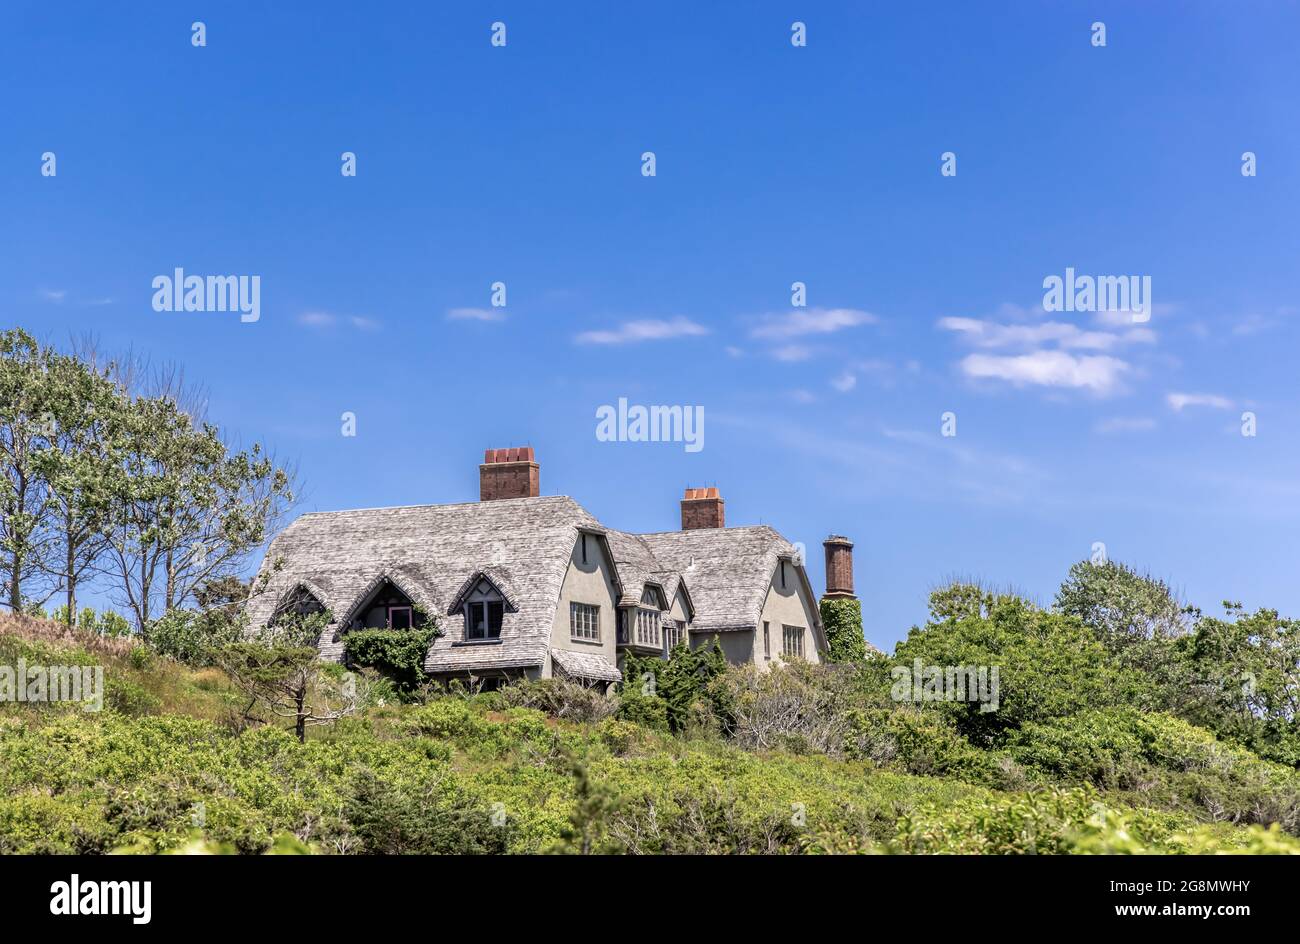 Image of a home located at 31 Old Beach Lane, East Hampton, NY Stock Photo